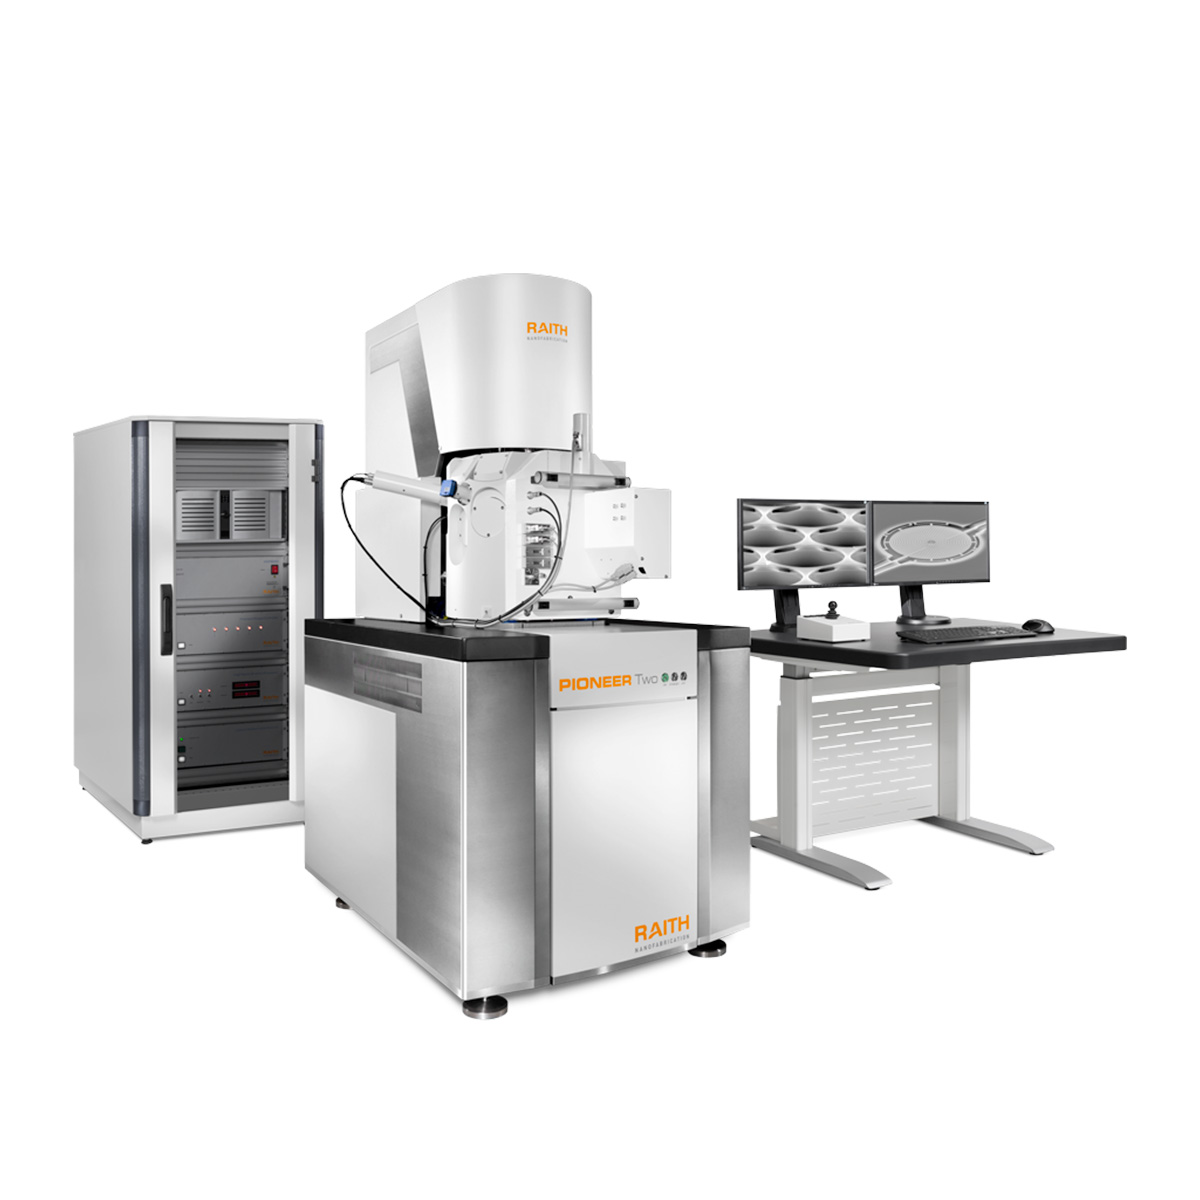 Photo of the SEM imaging and EBL tool PIONEER Two